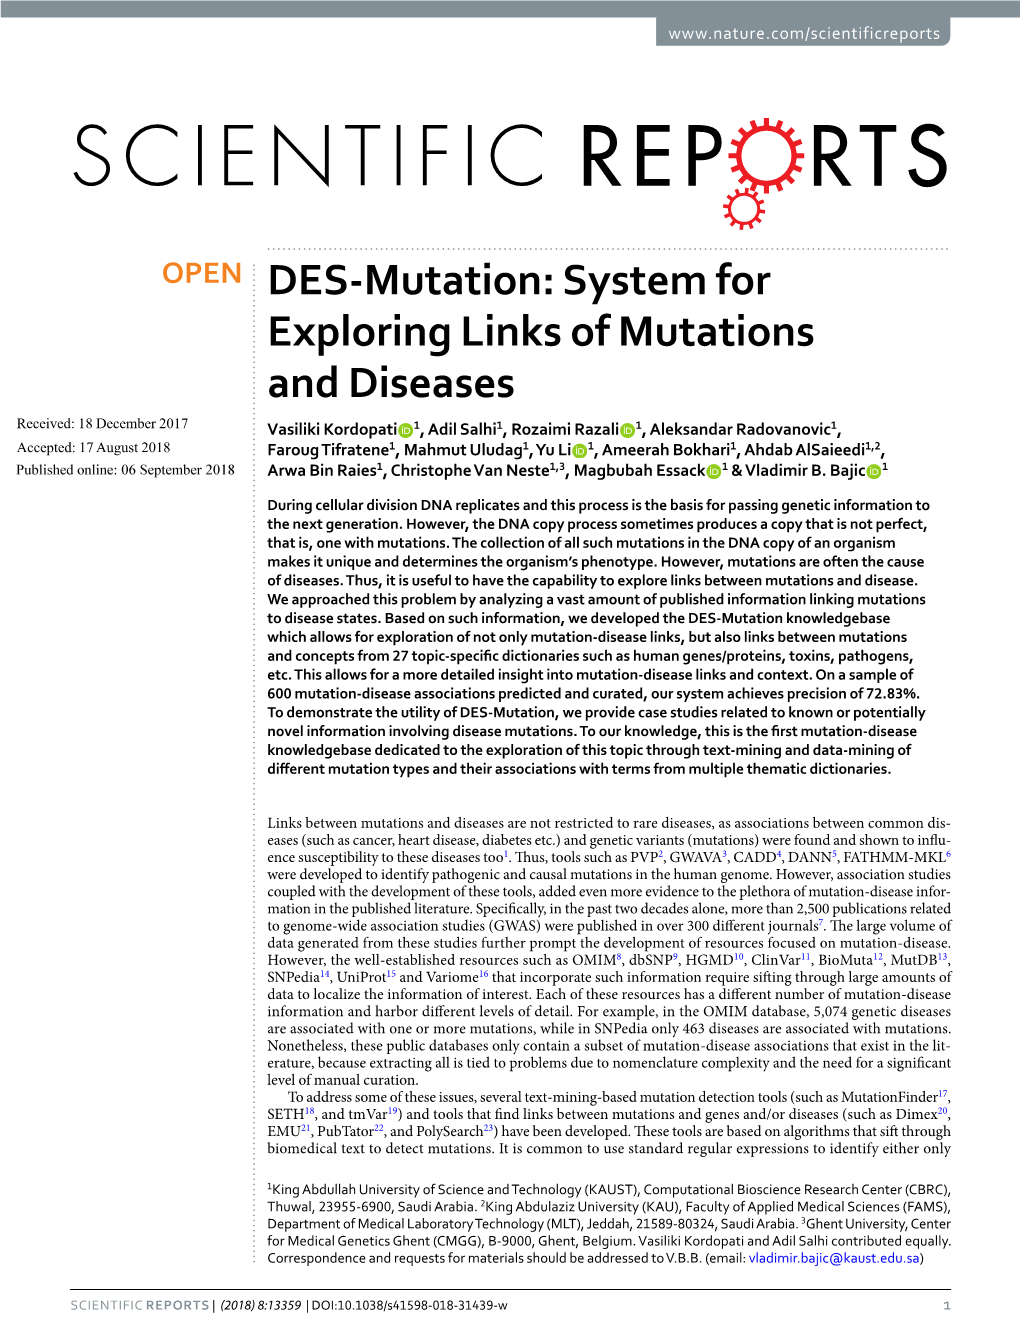 DES-Mutation: System for Exploring Links of Mutations and Diseases